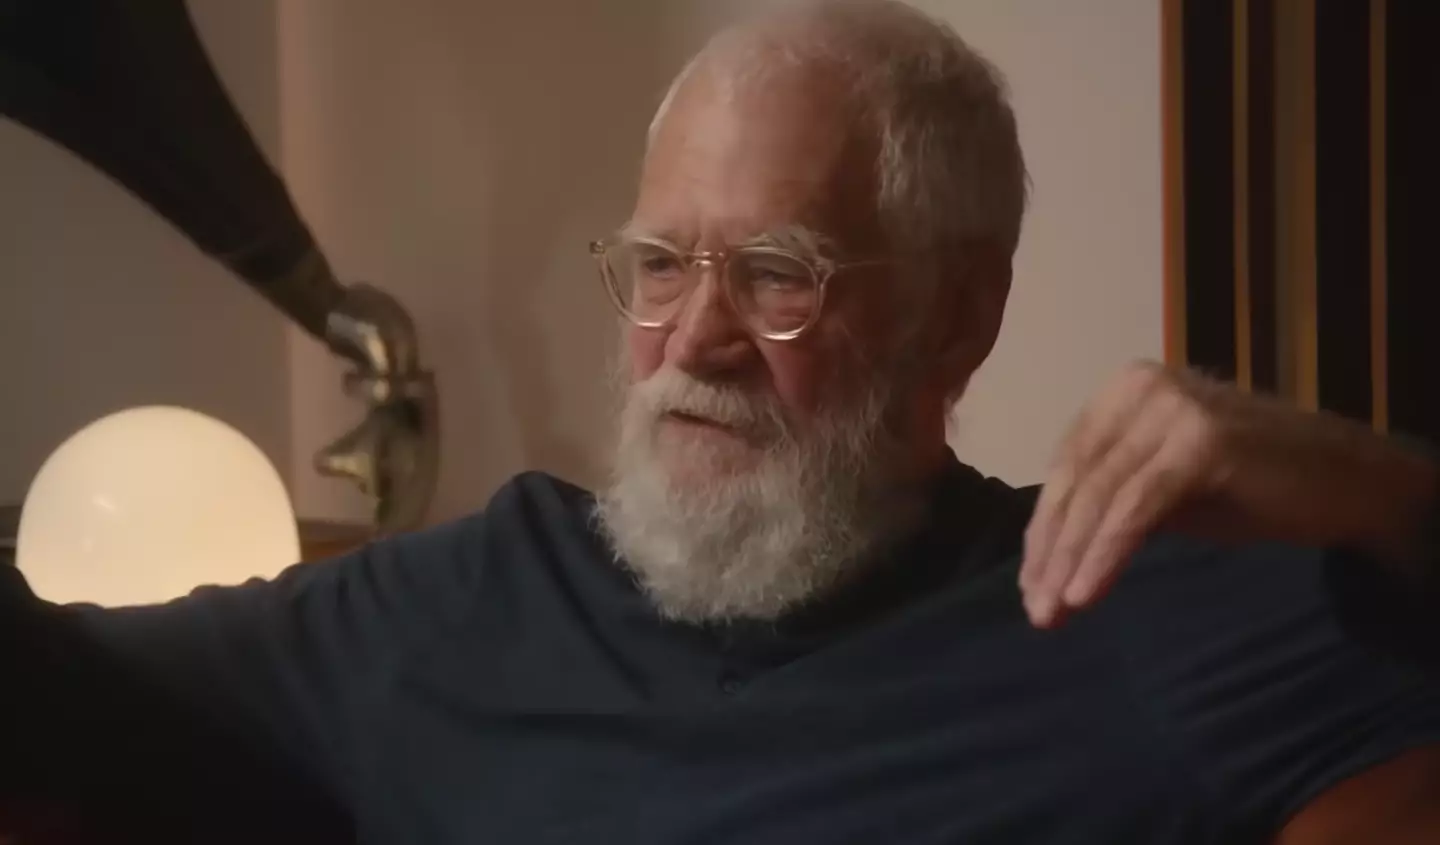 David Letterman was grateful to the singer for opening up about the condition.